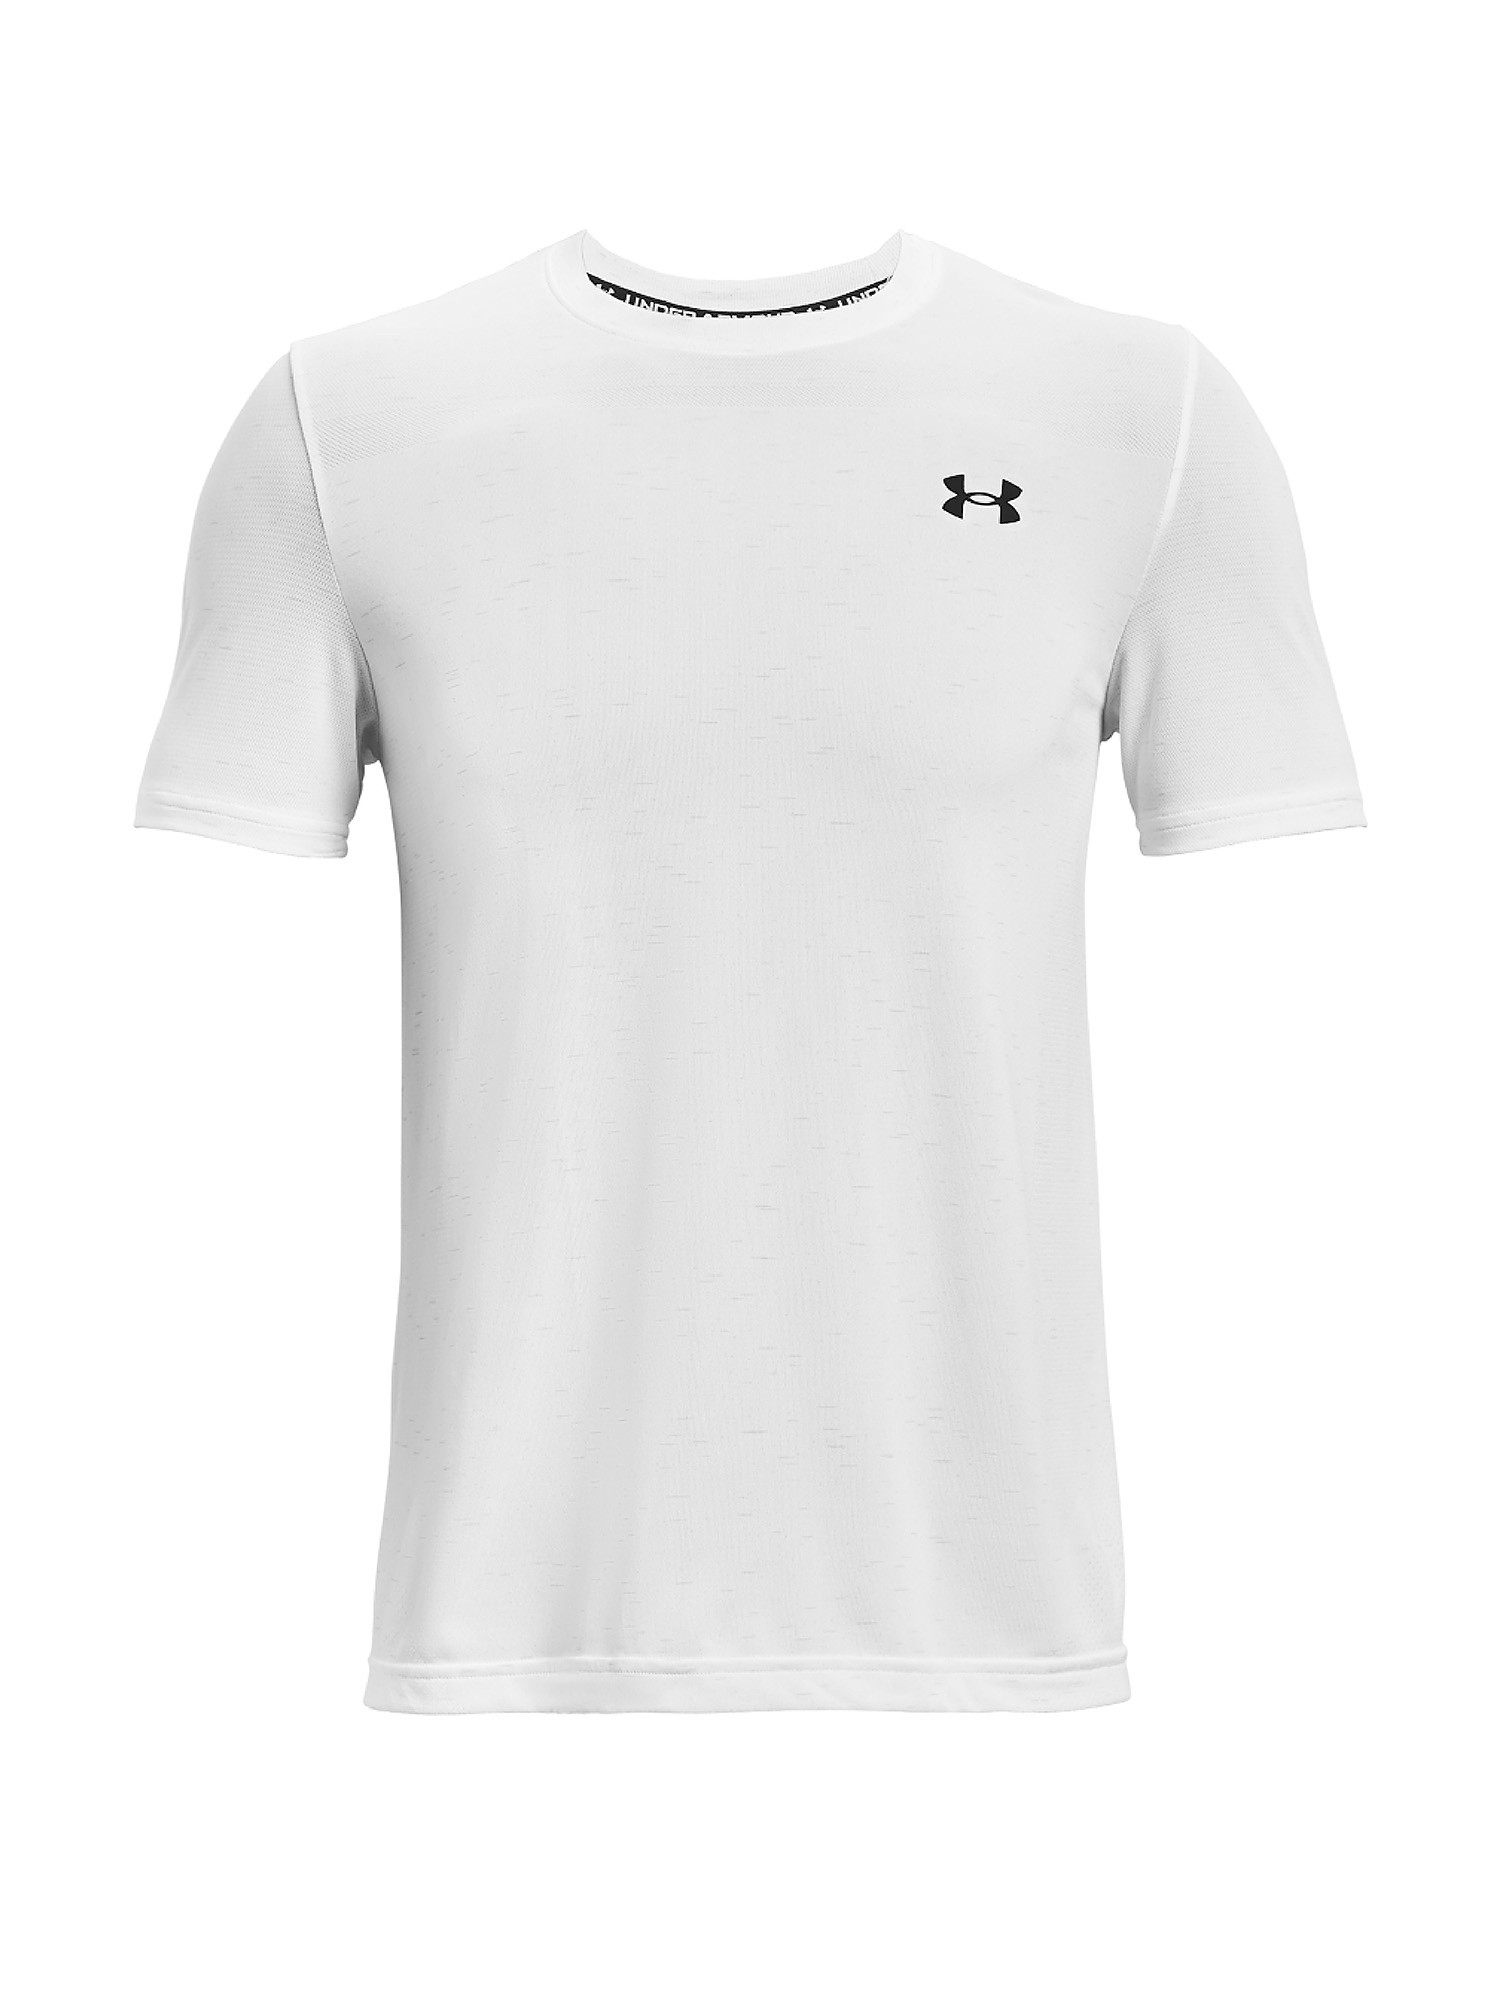 Under Armour - UA Seamless Short Sleeve Top, White, large image number 0